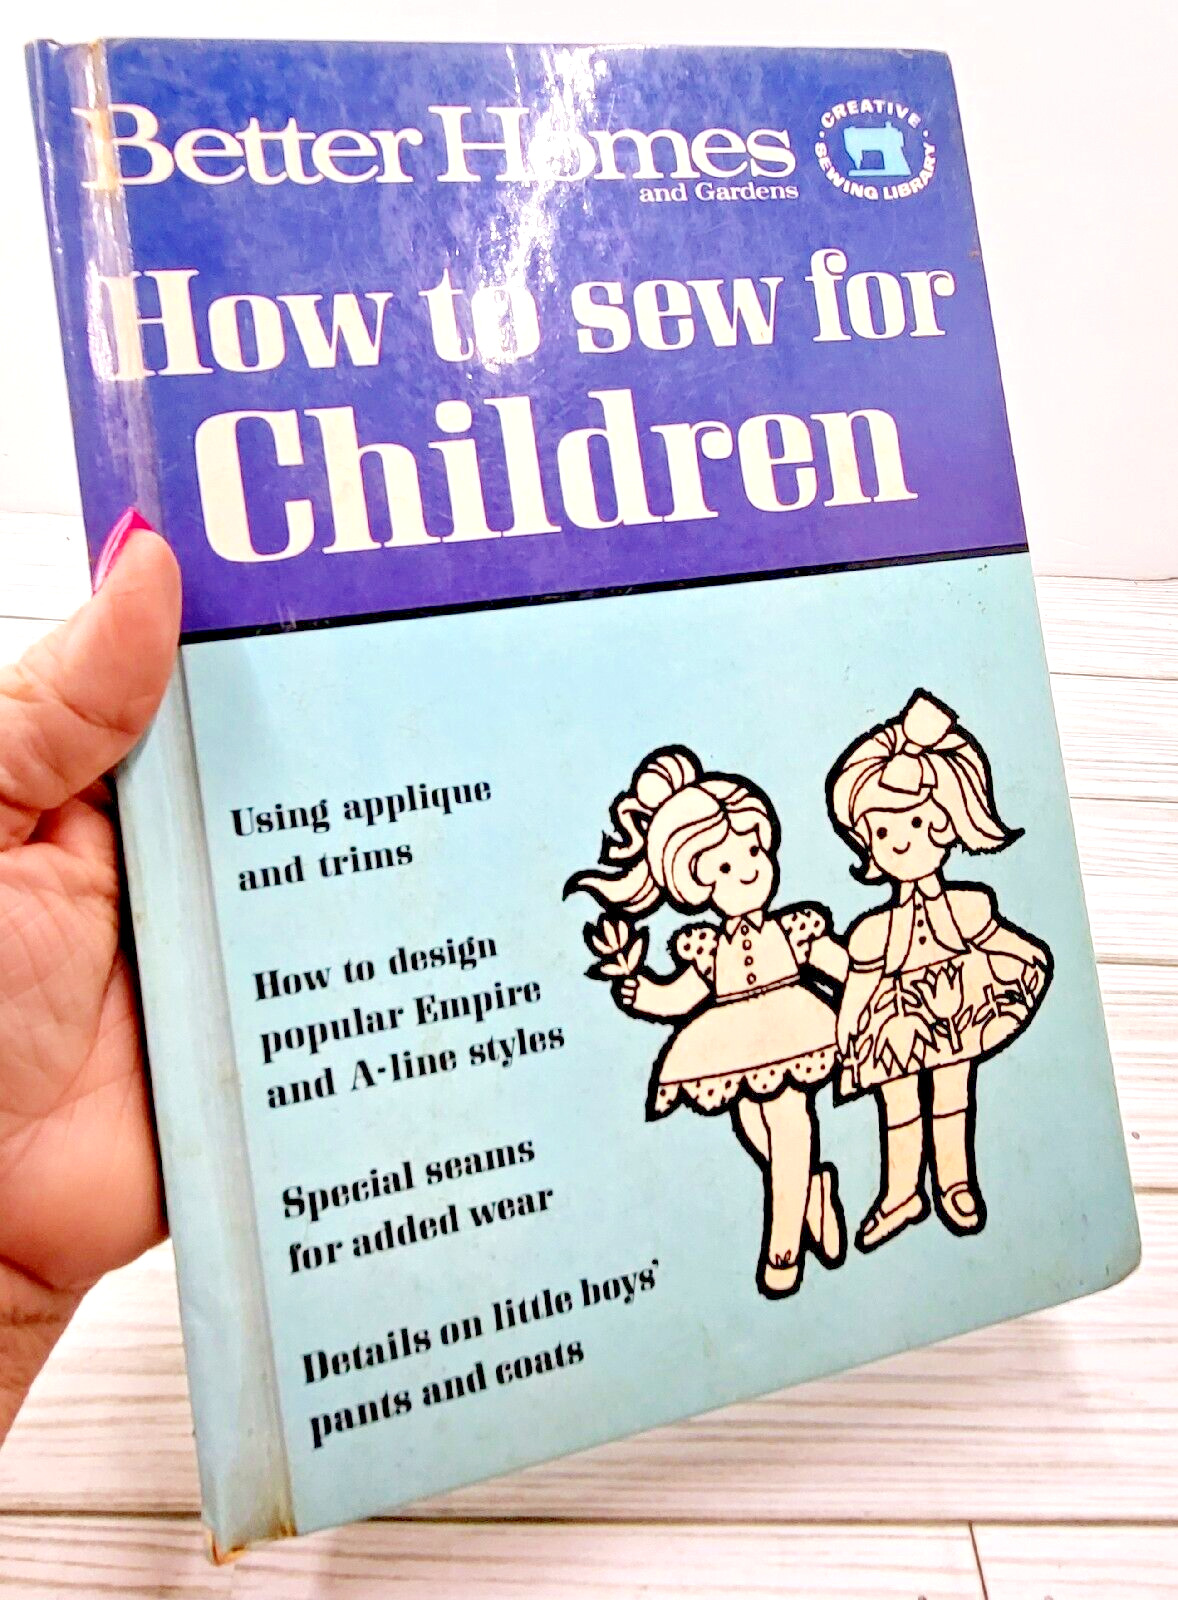 Rare 1966 How To Sew For Children by Better Homes and Gardens Reference Book BHG